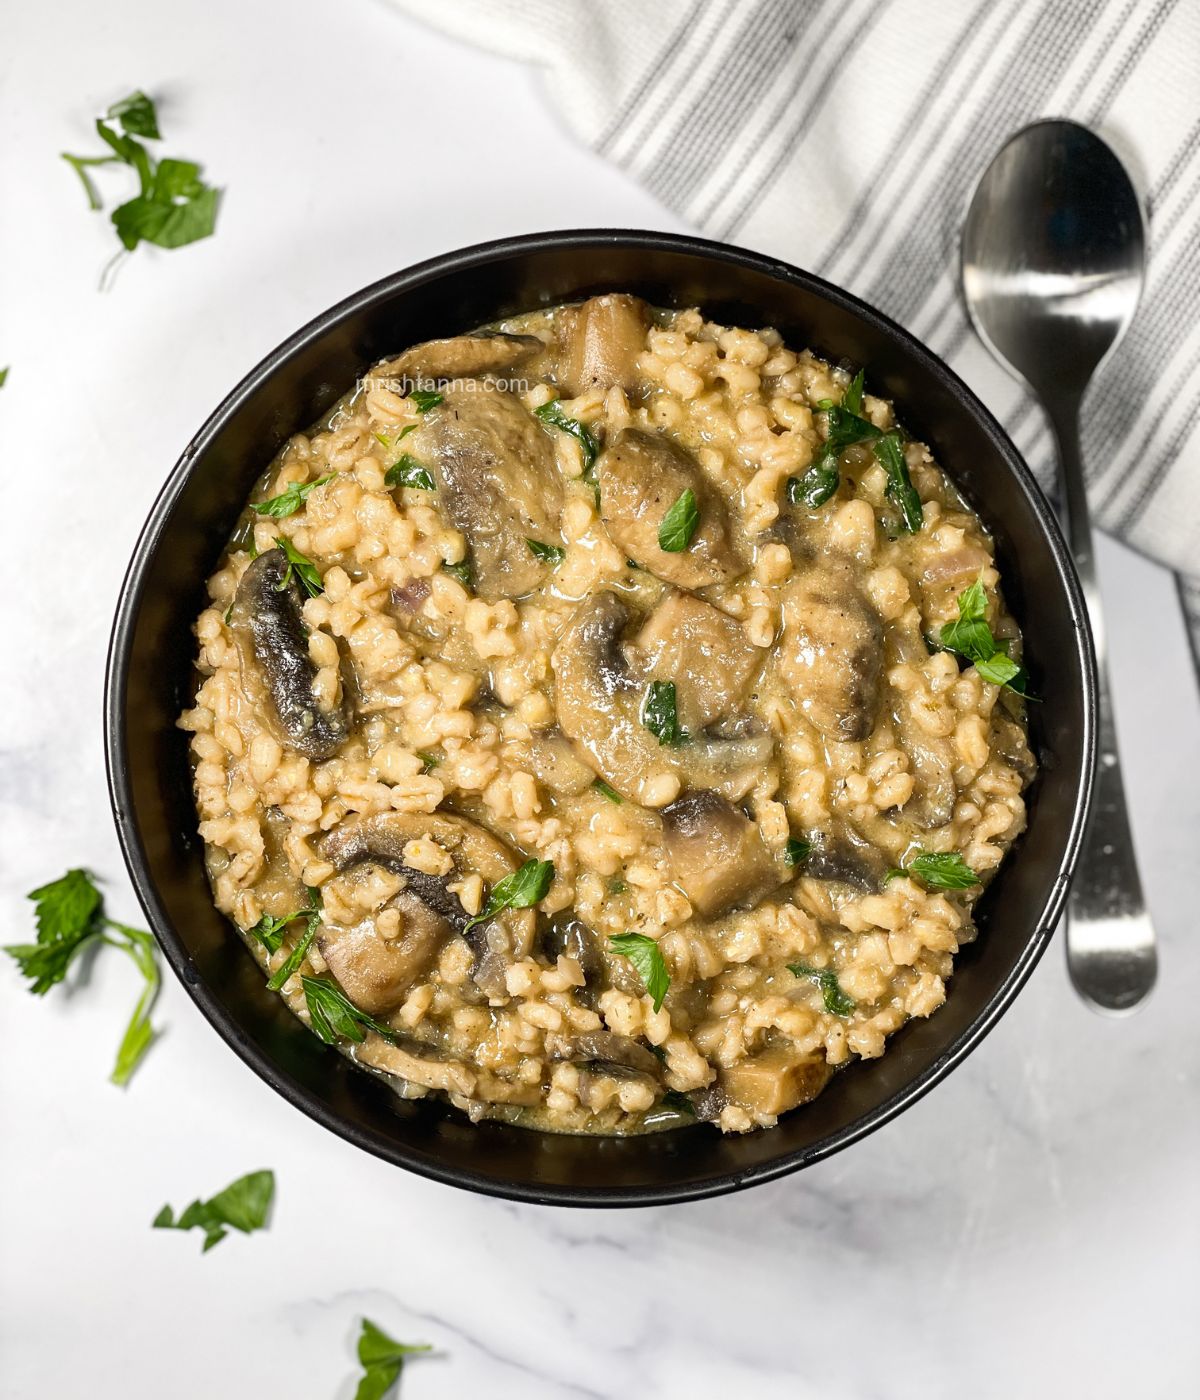 A bowl is full of barley risotto.